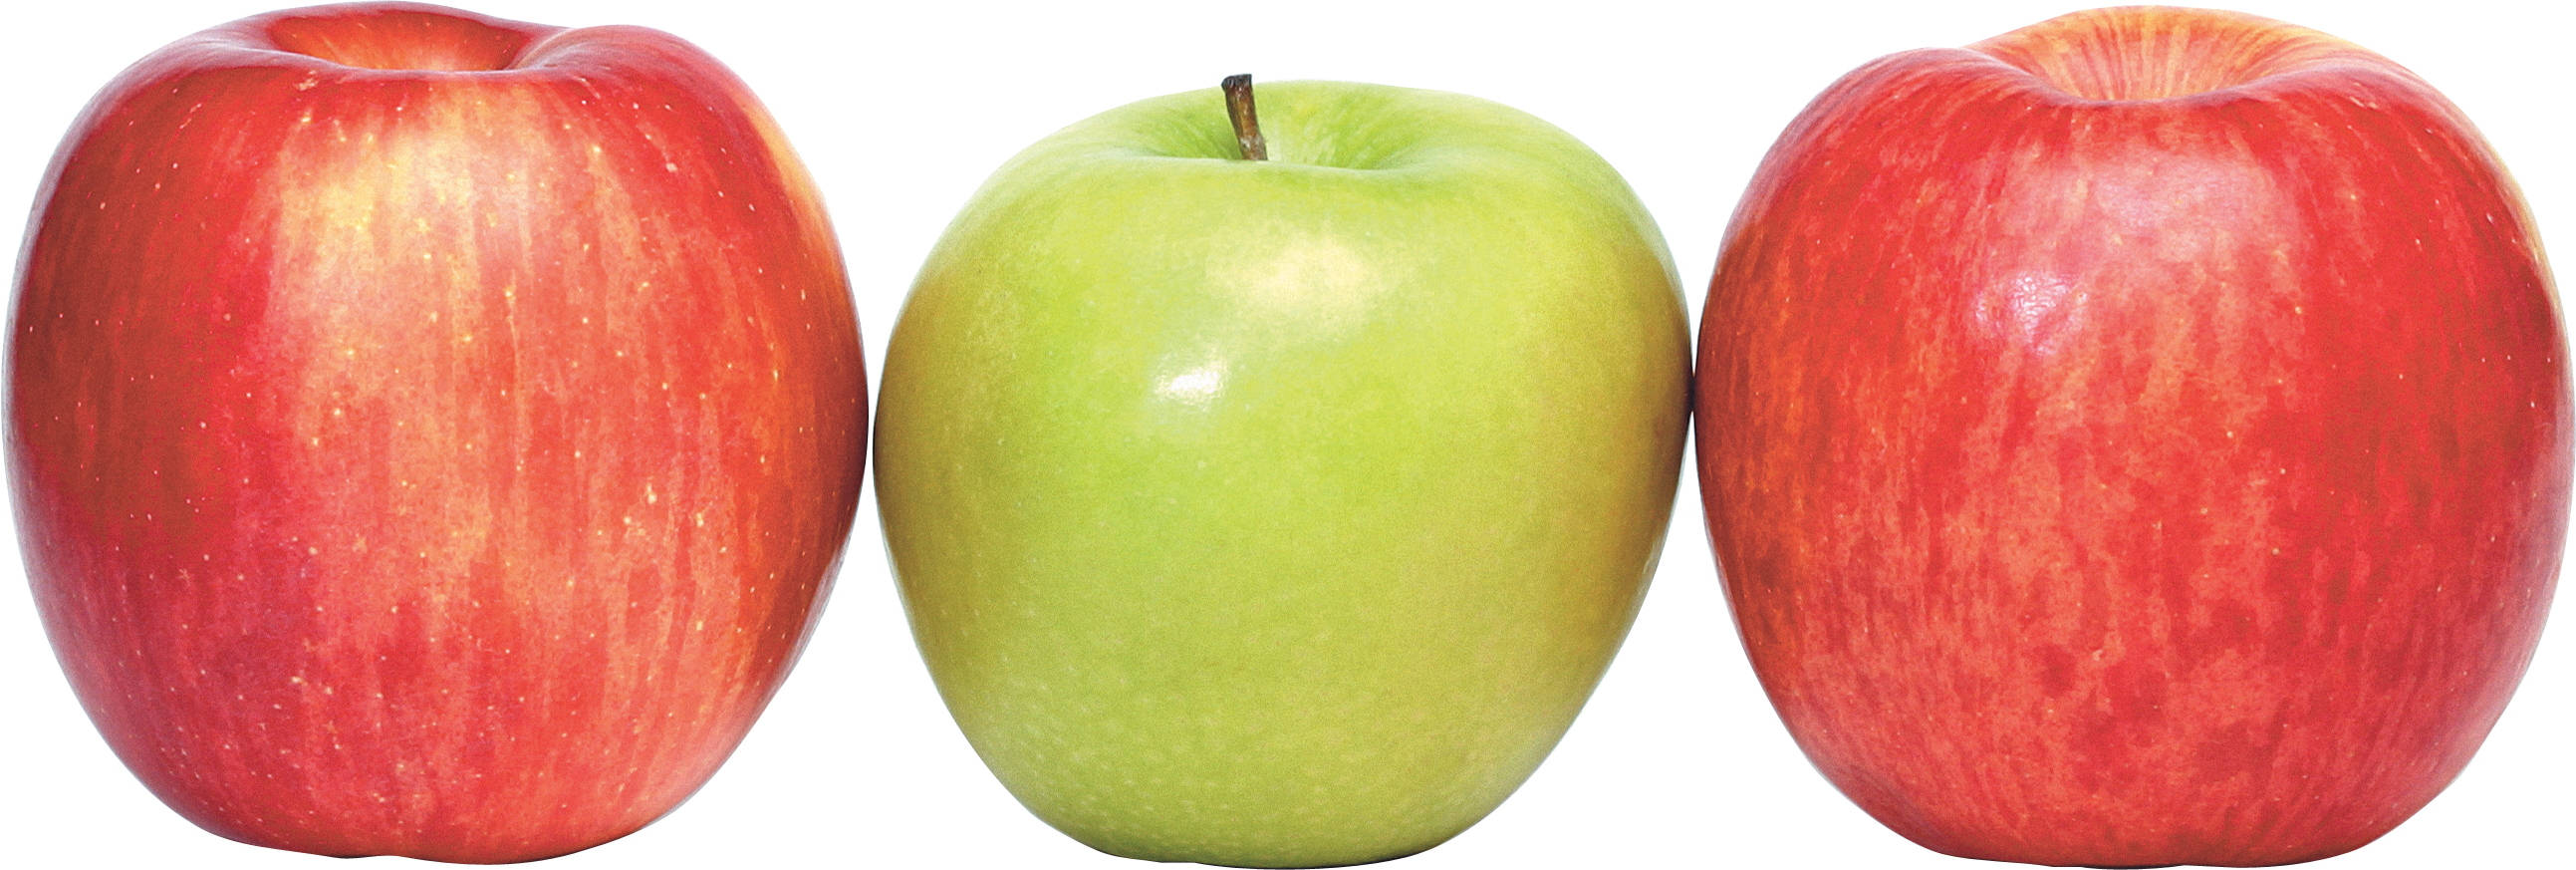 Apple's - Red And Green Apples Png (2586x873)